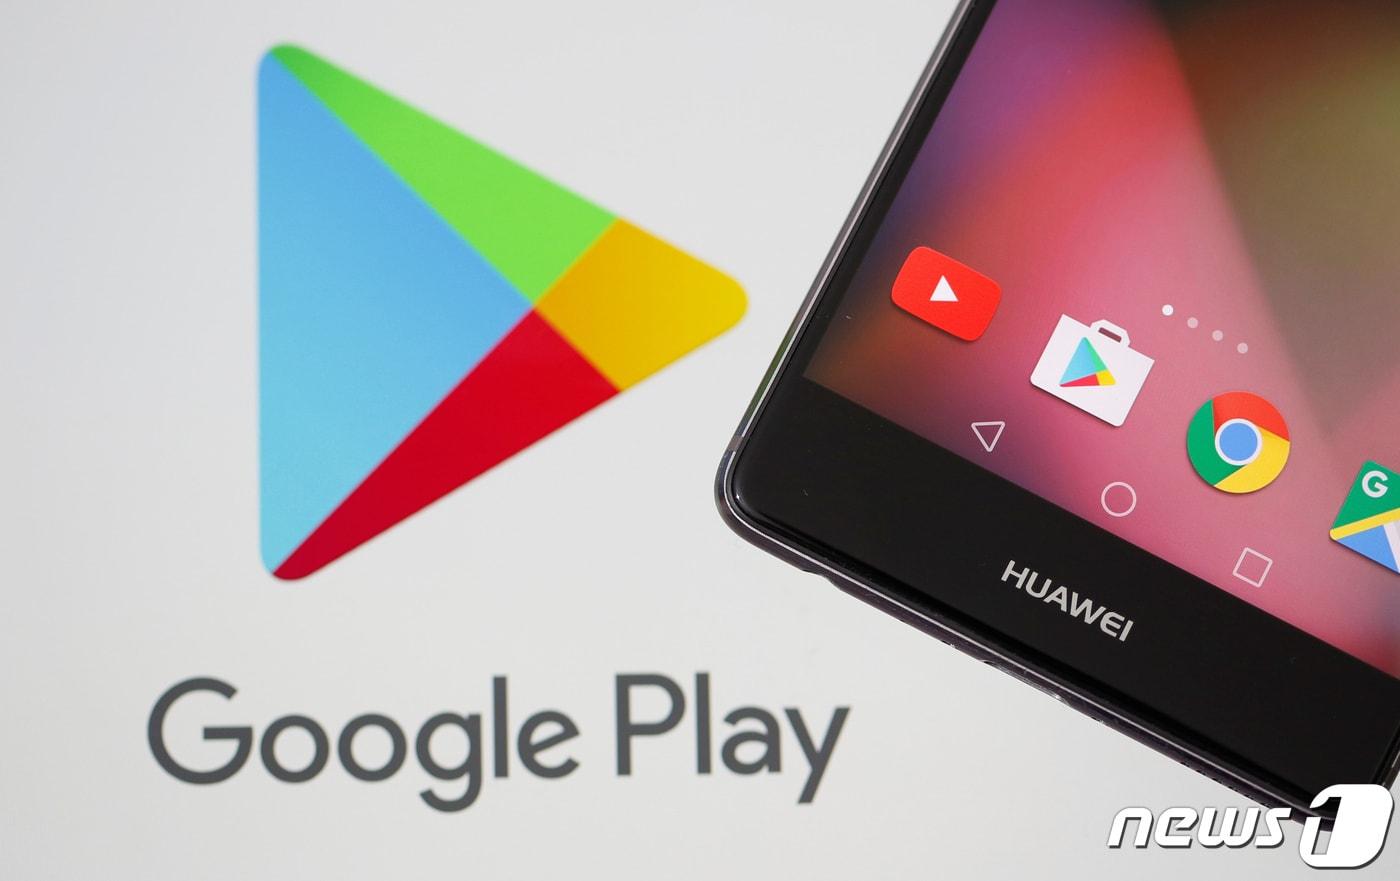 A Huawei smartphone is seen in front of displayed Google Play logo in this illustration taken May 20, 2019. REUTERS/Dado Ruvic/Illustration